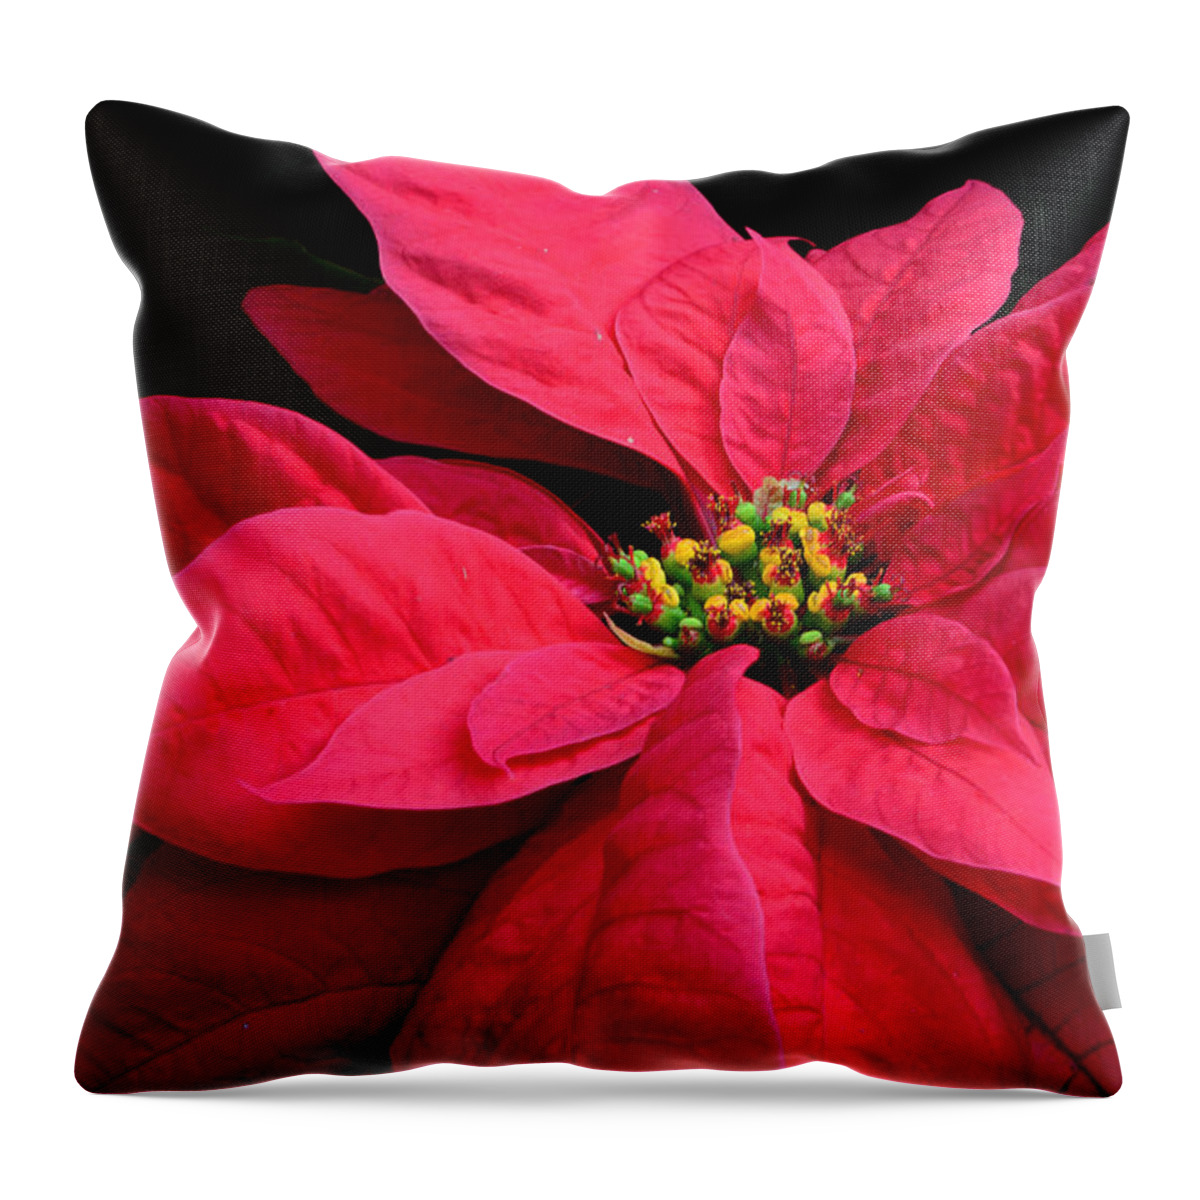 Flowers Throw Pillow featuring the photograph Pointsettia Close Up by Cindy Manero